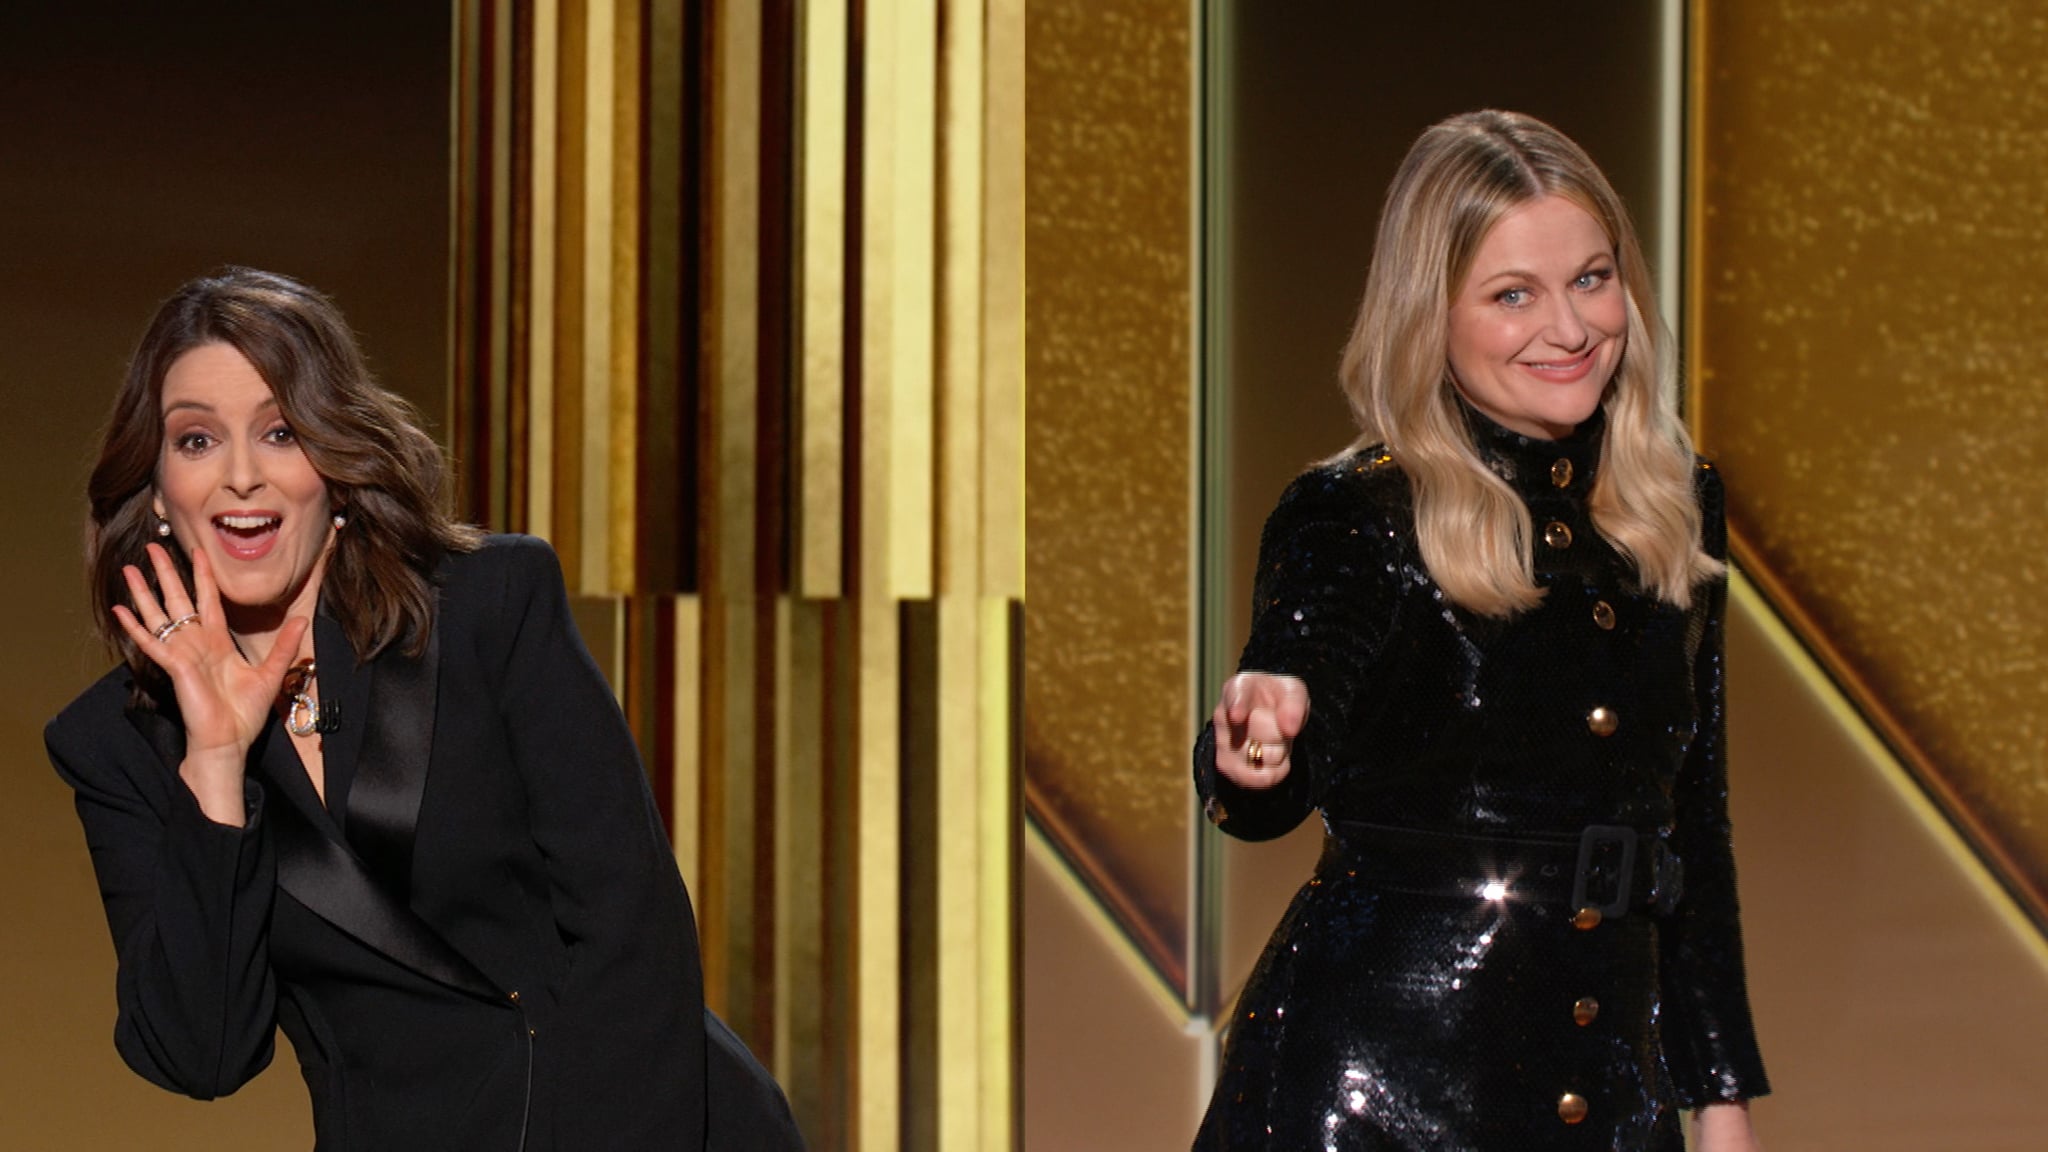 UNSPECIFIED: 78th Annual GOLDEN GLOBE AWARDS -- Pictured in this screengrab released on February 28, (l-r) Co-hosts Tina Fey and Amy Poehler speak onstage at the 78th Annual Golden Globe Awards broadcast on February 28, 2021. --  (Photo by NBC/NBCU Photo Bank via Getty Images)